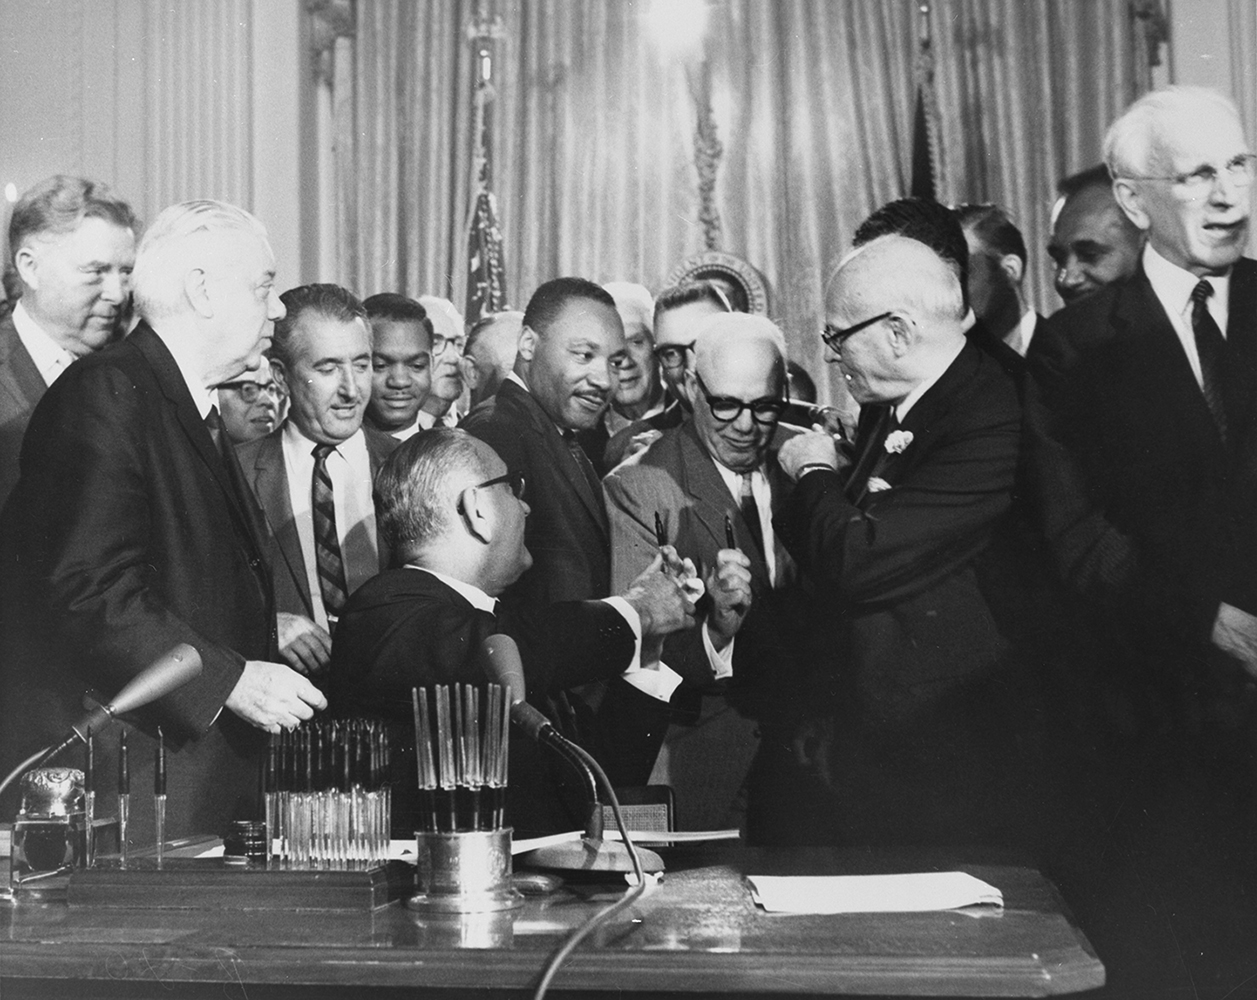 President Lyndon Johnson handing pens to Dr. Martin Luther King, Jr. and AFL-CIO President, George Meany, at the signing the 1964 Civil Rights Act